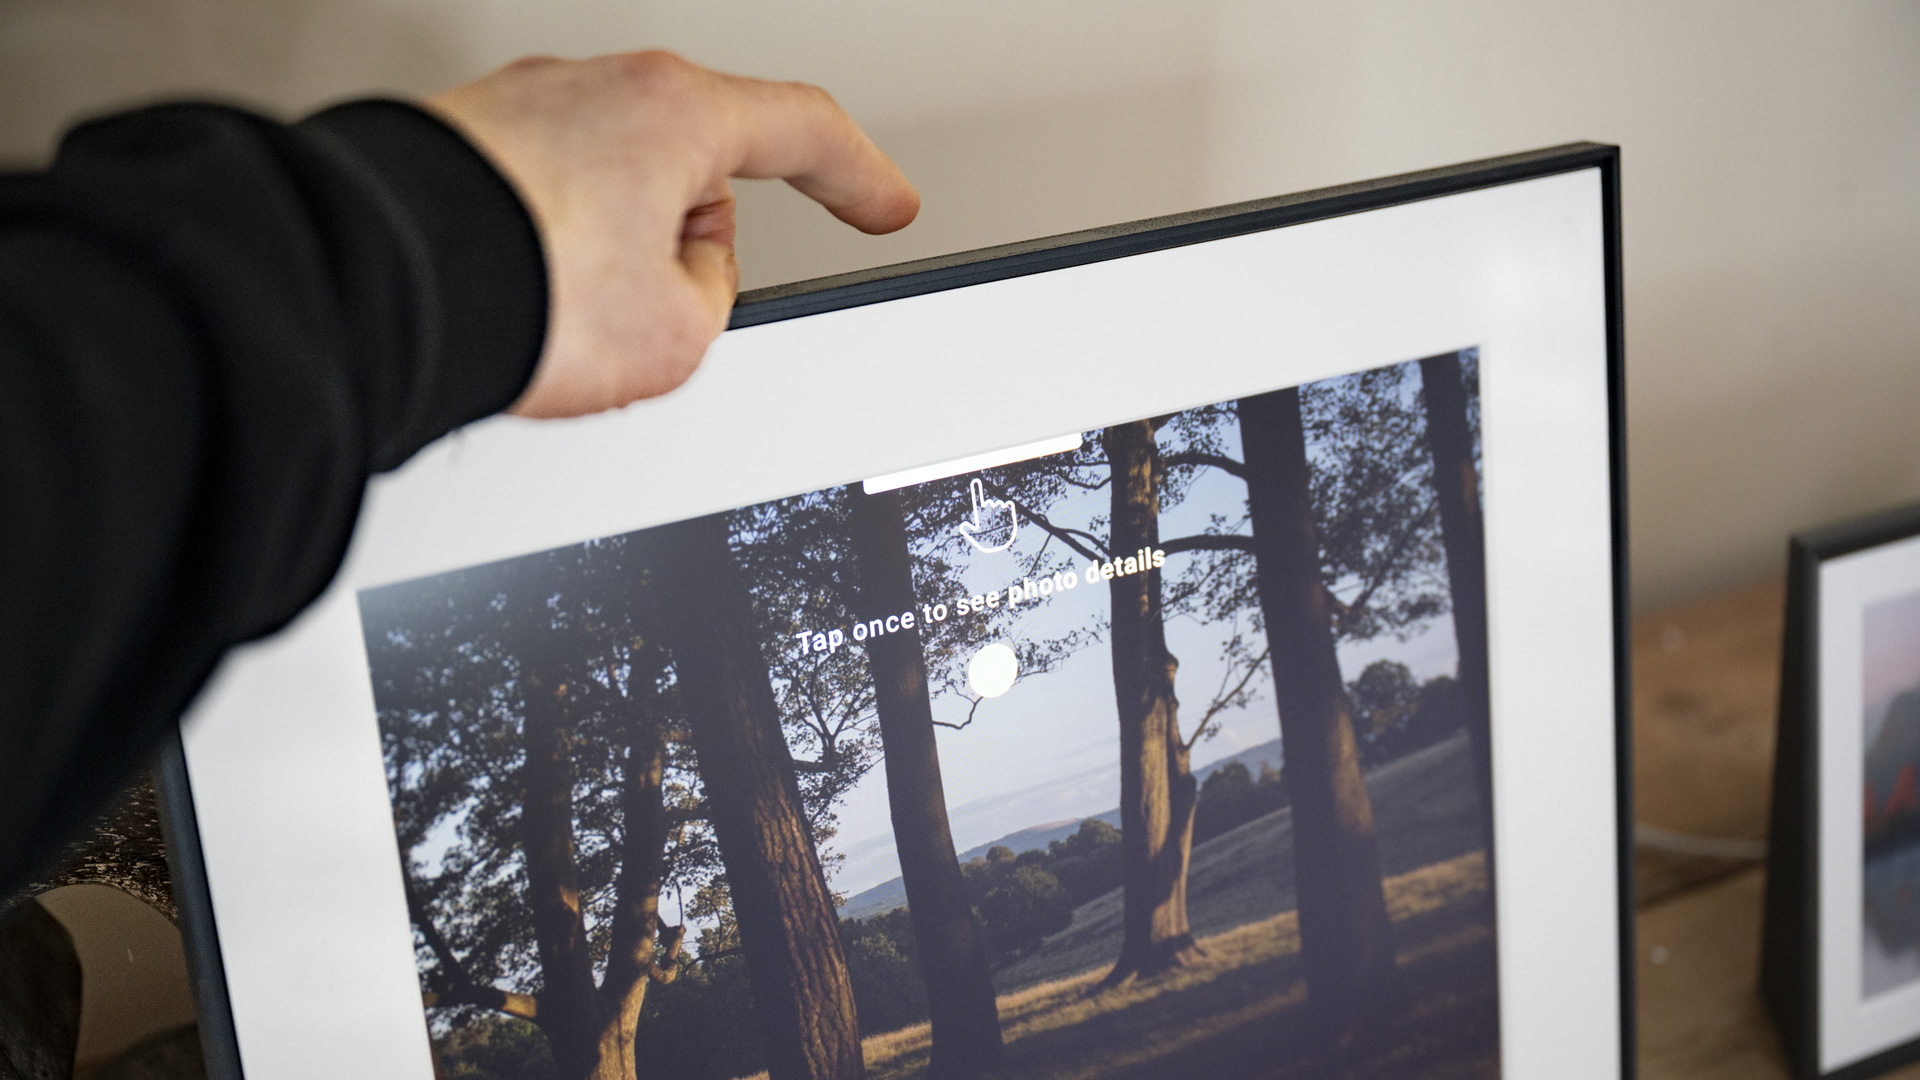 Touch bar panel in use of the Aura Walden digital photo frame